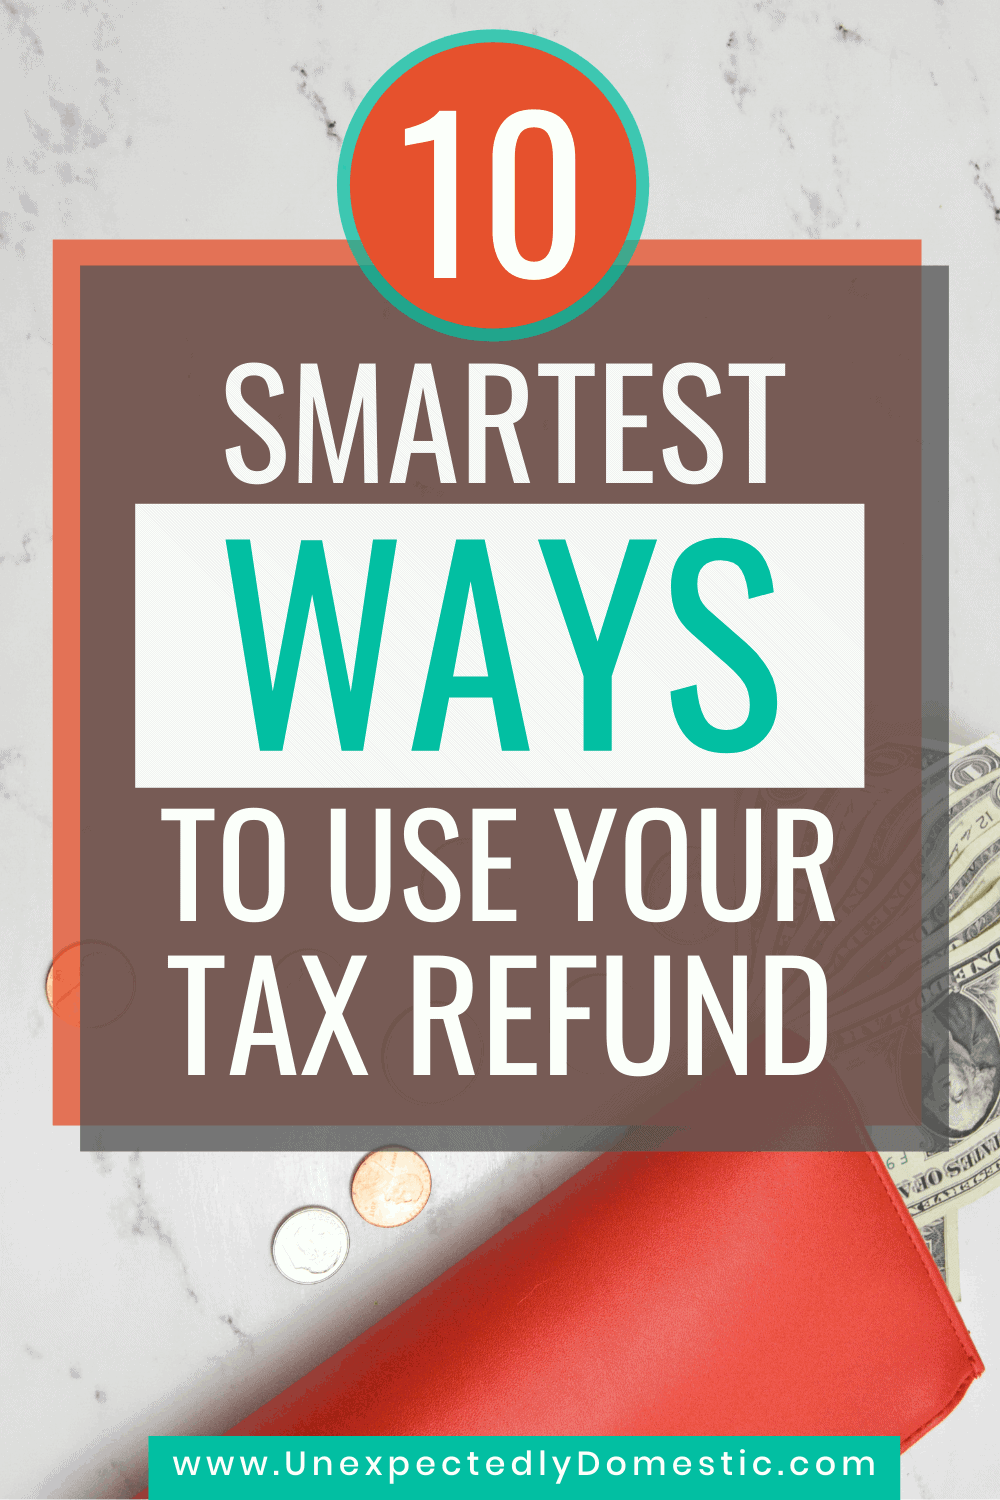 10 smartest ways to use your tax refund! Here's how to budget your tax refund so you can stretch it and really improve your financial situation.